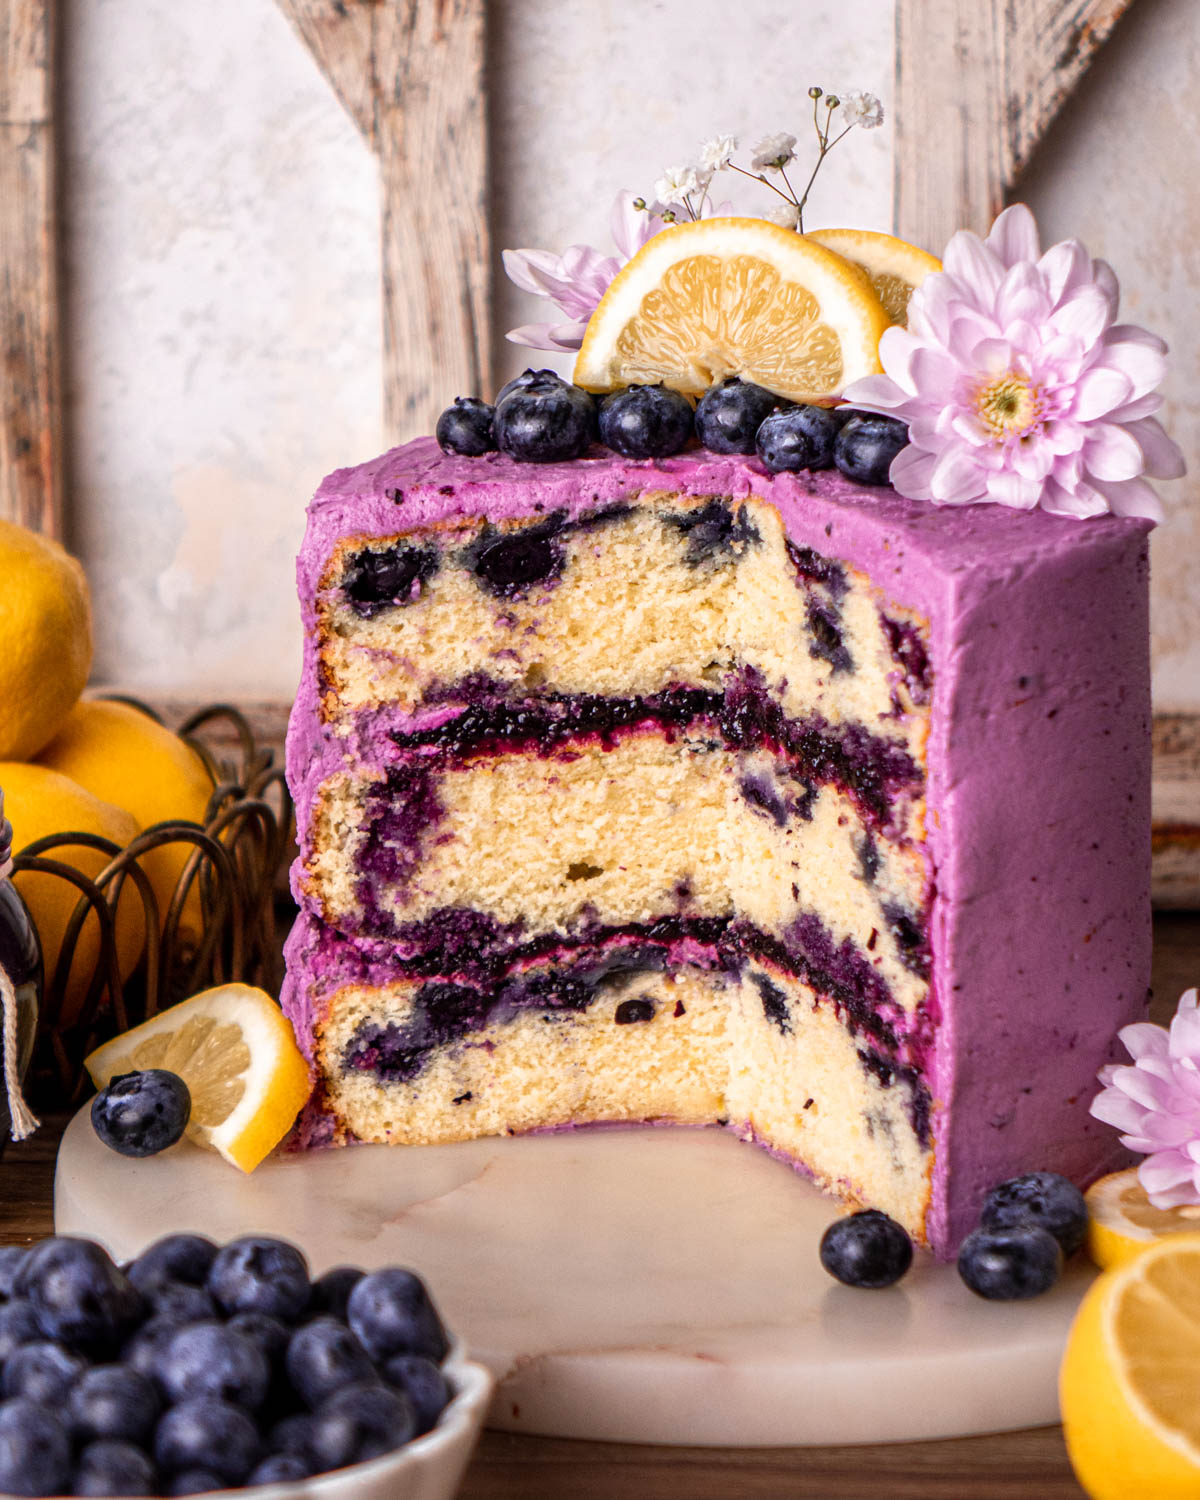 cut open blueberry lemon cake frosted with purple frosting, filled with blueberry jam, topped with blueberries, lemon slices and flowers